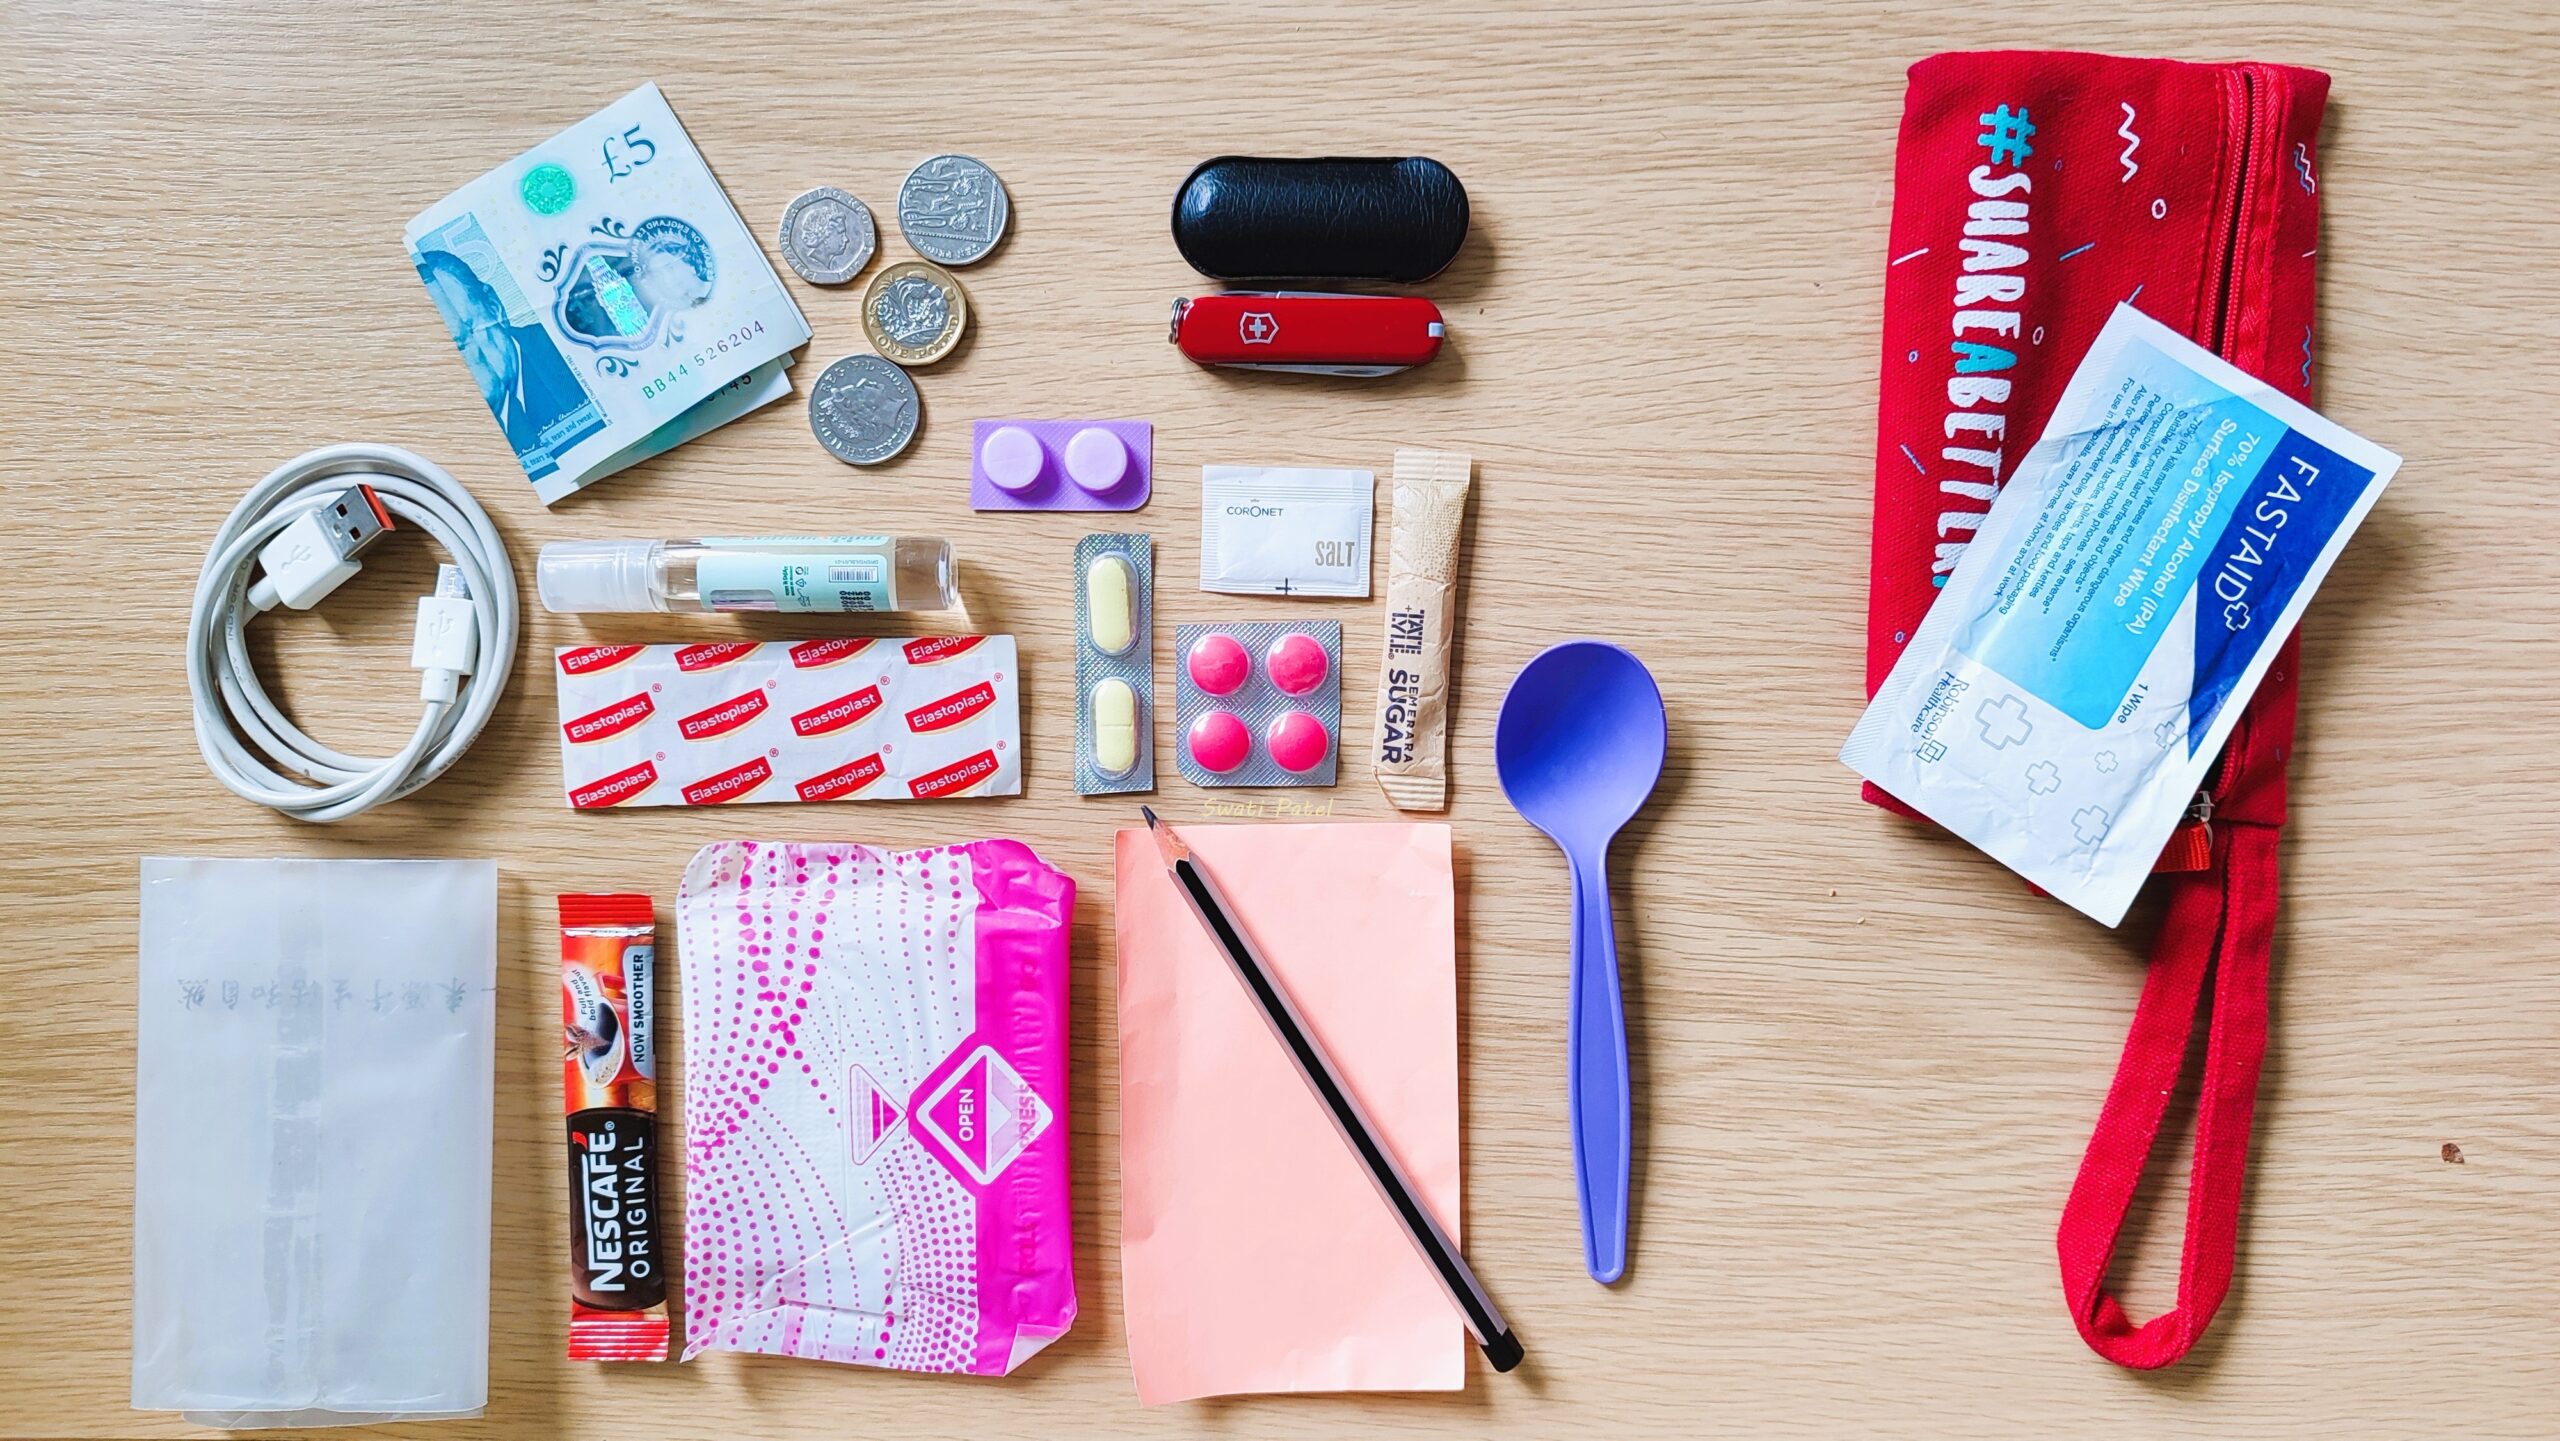 A guide to compose your own travel utility kit